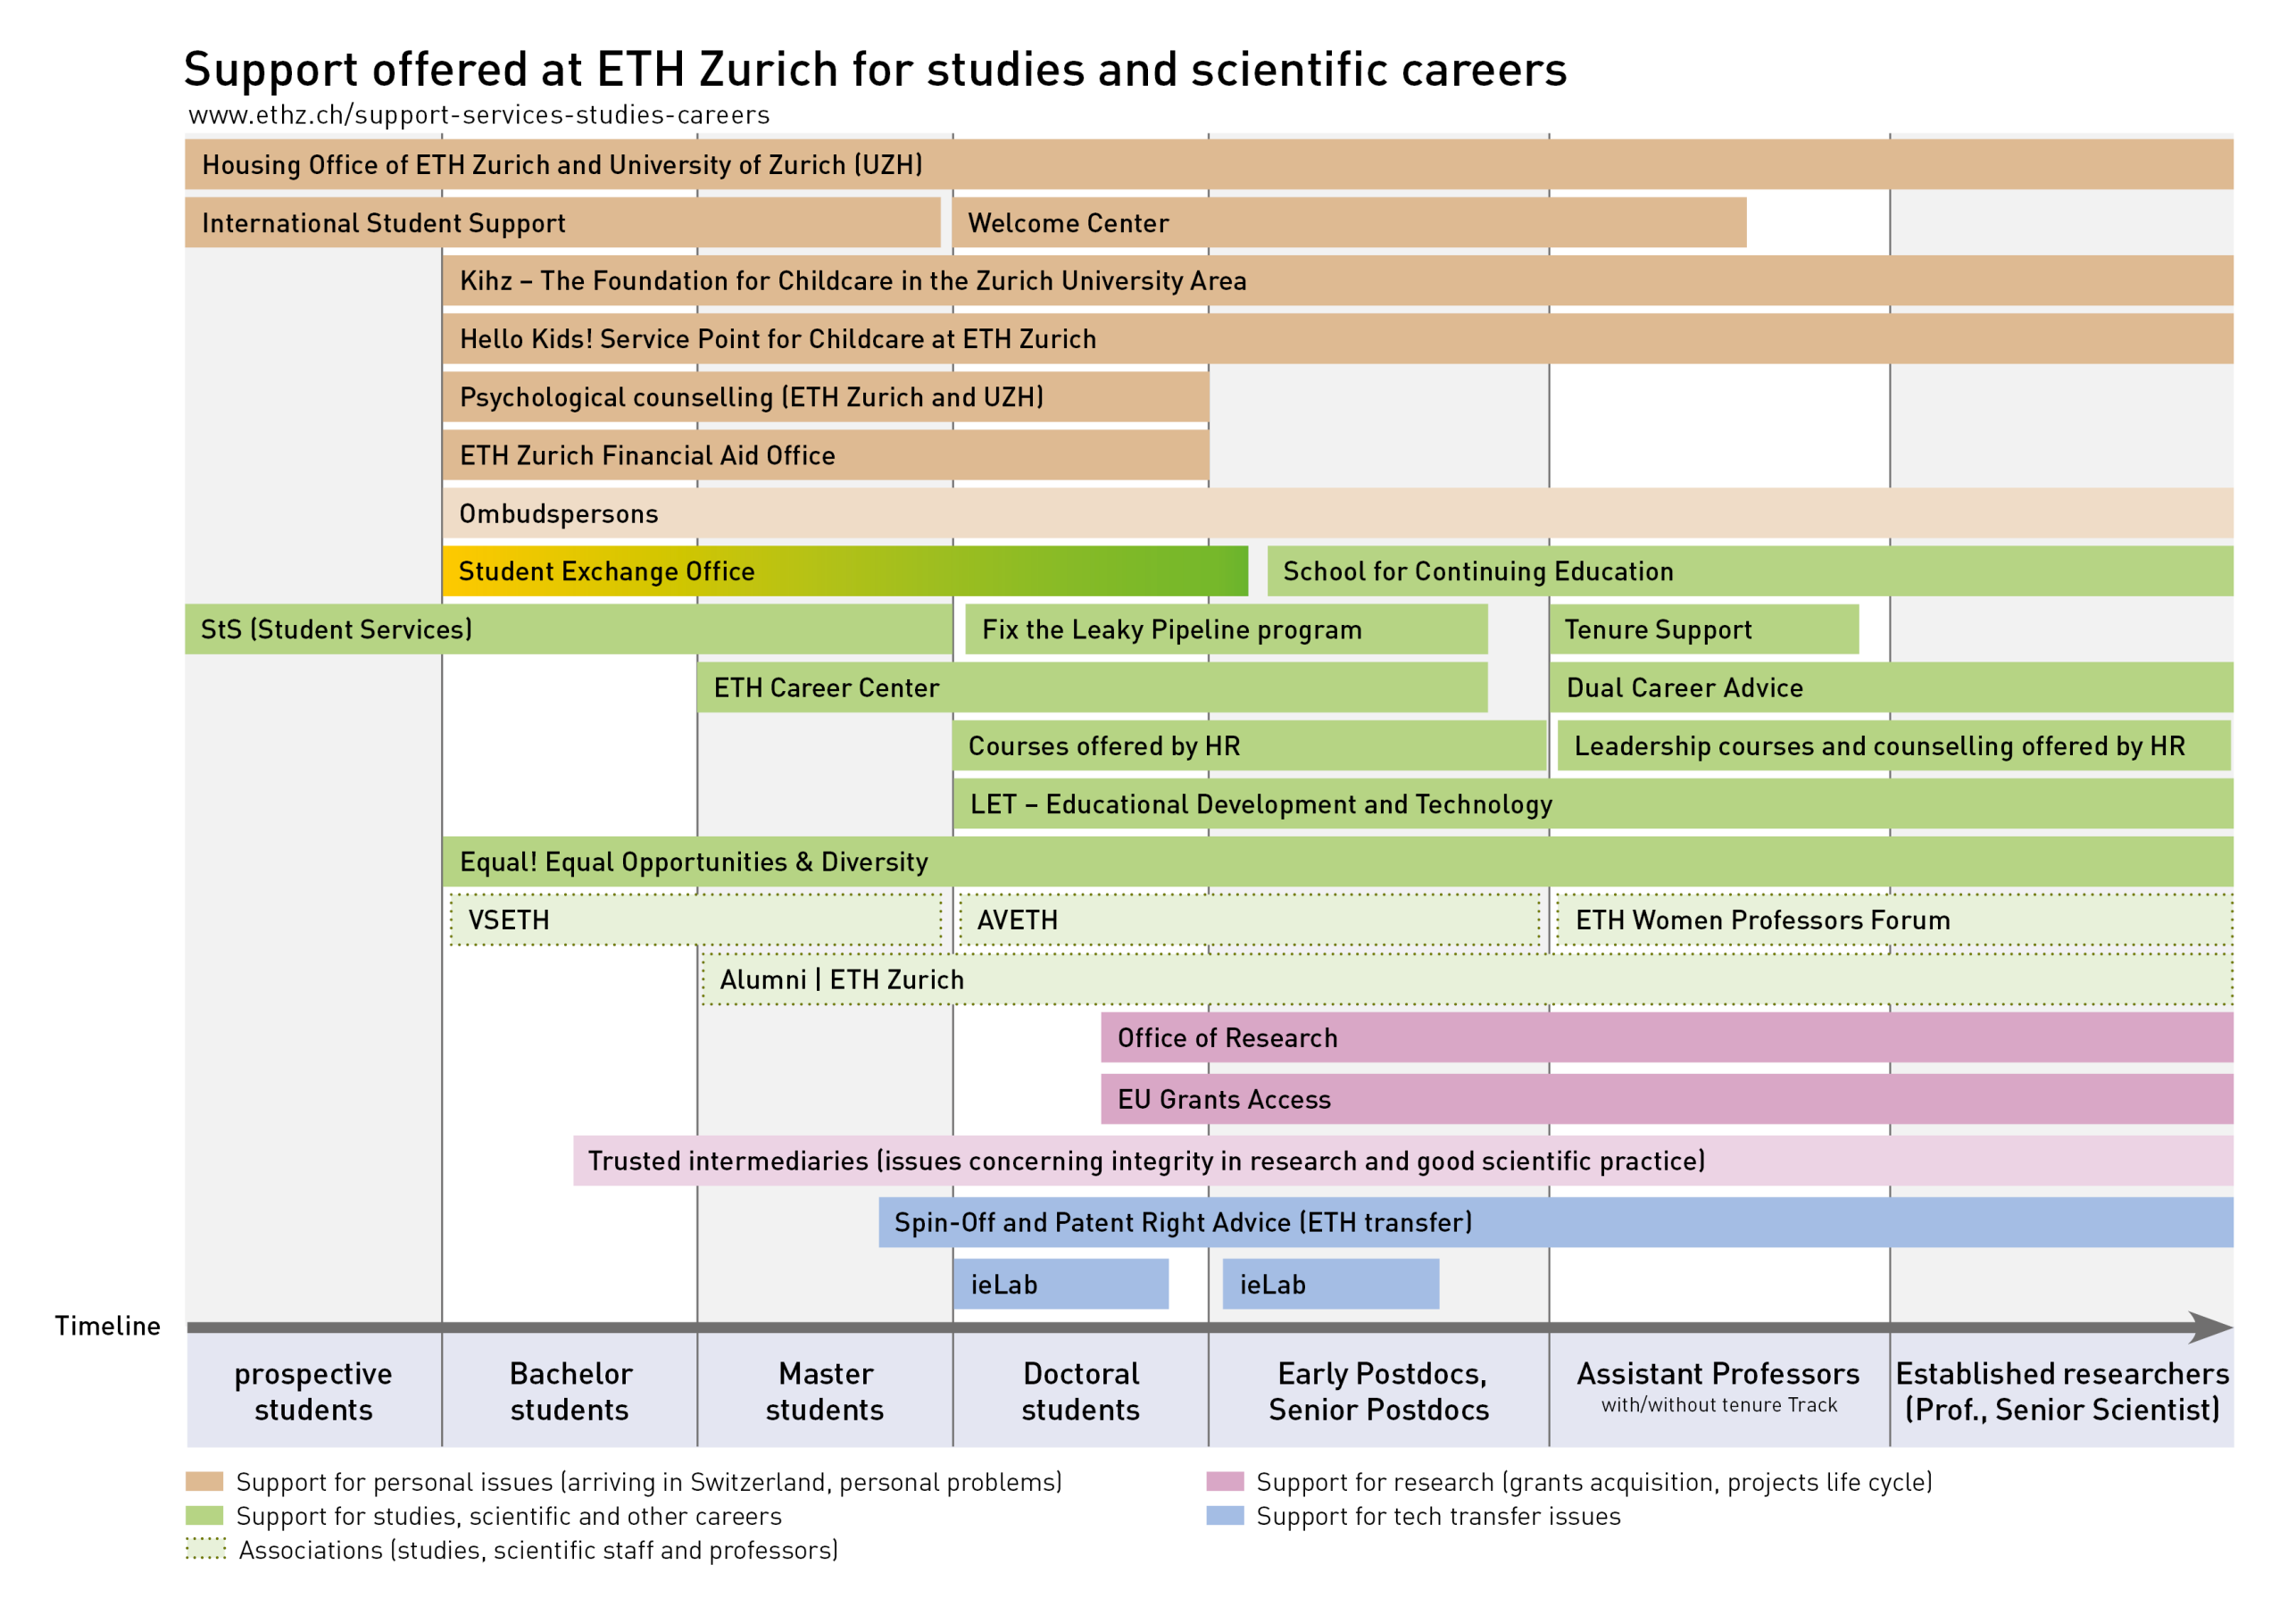 Support offered at ETH Zurich for Studies and Career